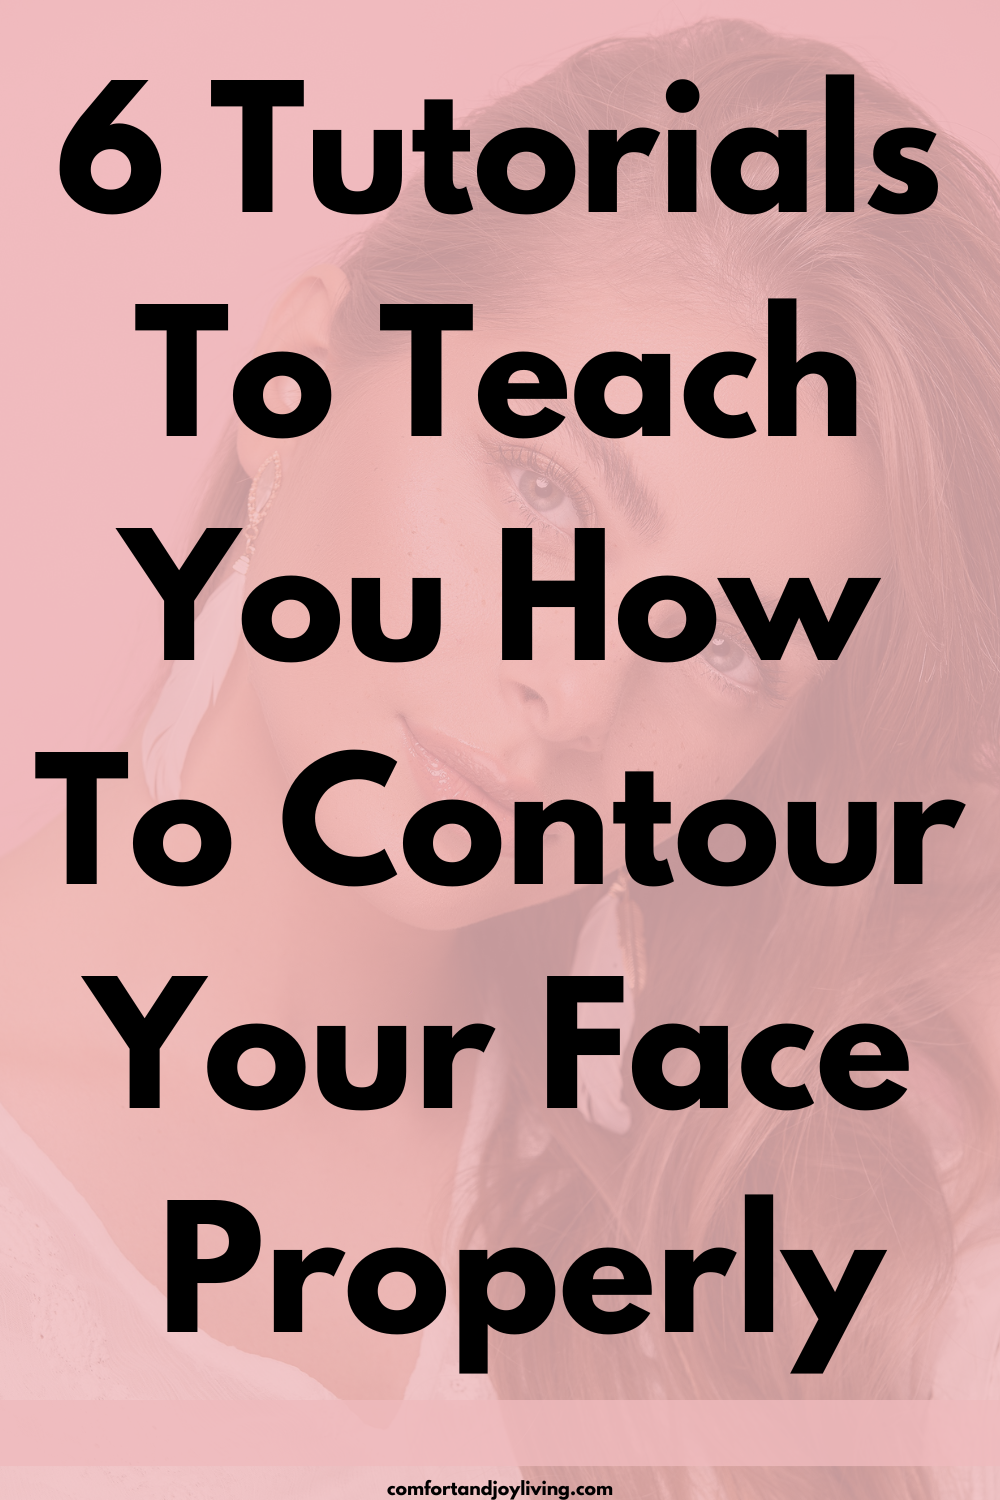 6 Tutorials To Teach You How To Contour Your Face Properly